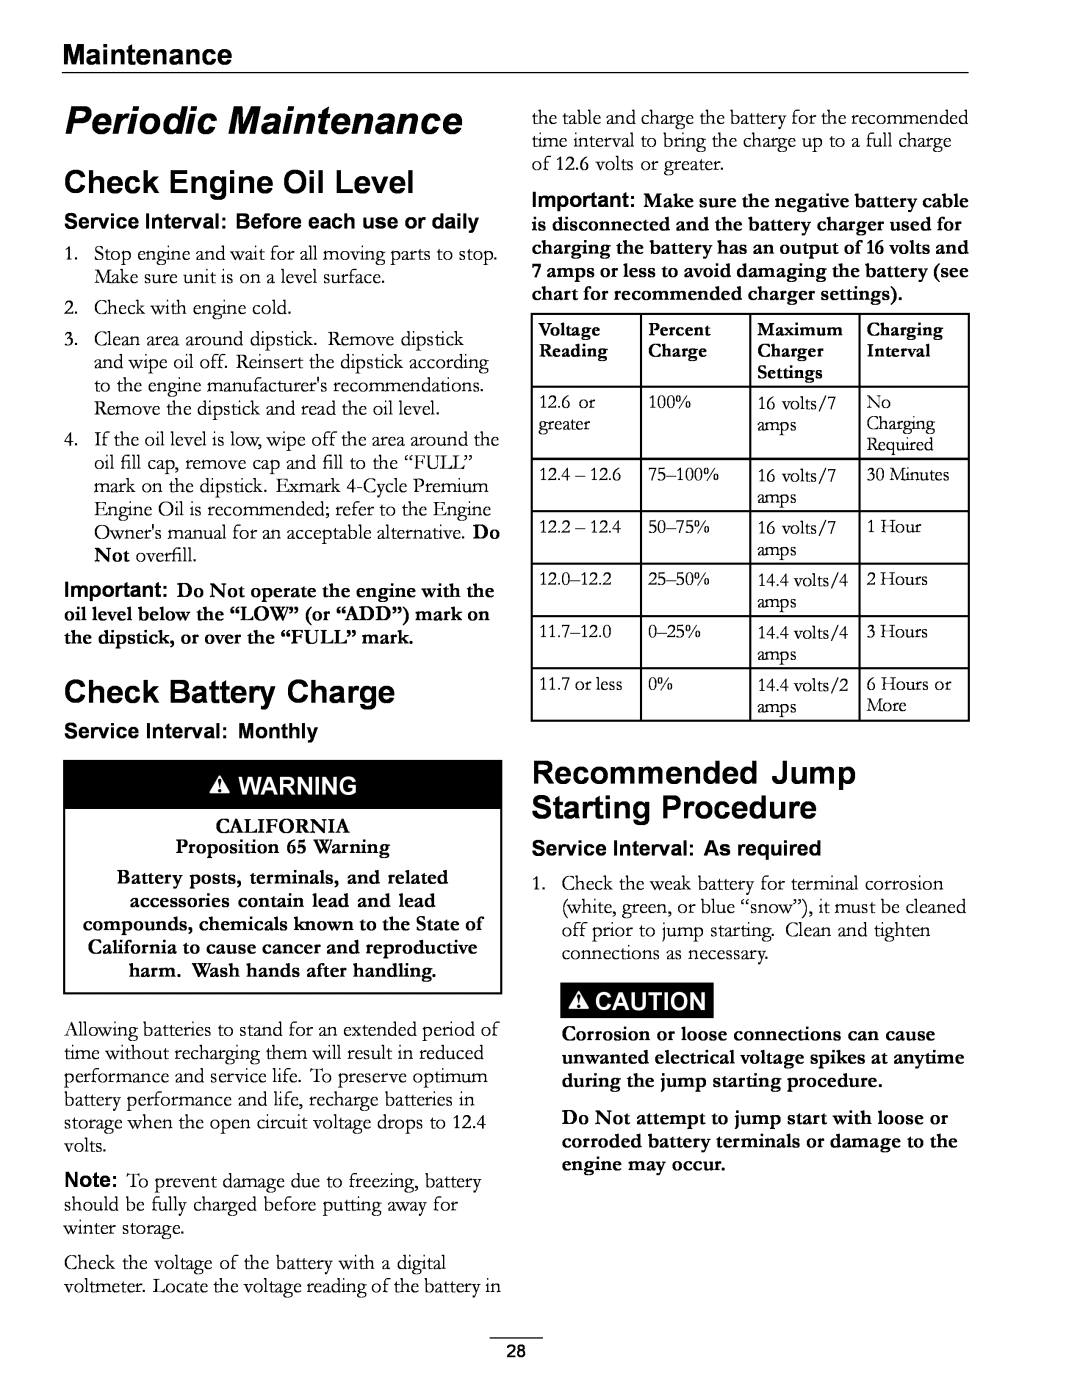 Exmark 312, 0 manual Periodic Maintenance, Check Engine Oil Level, Check Battery Charge, Recommended Jump Starting Procedure 